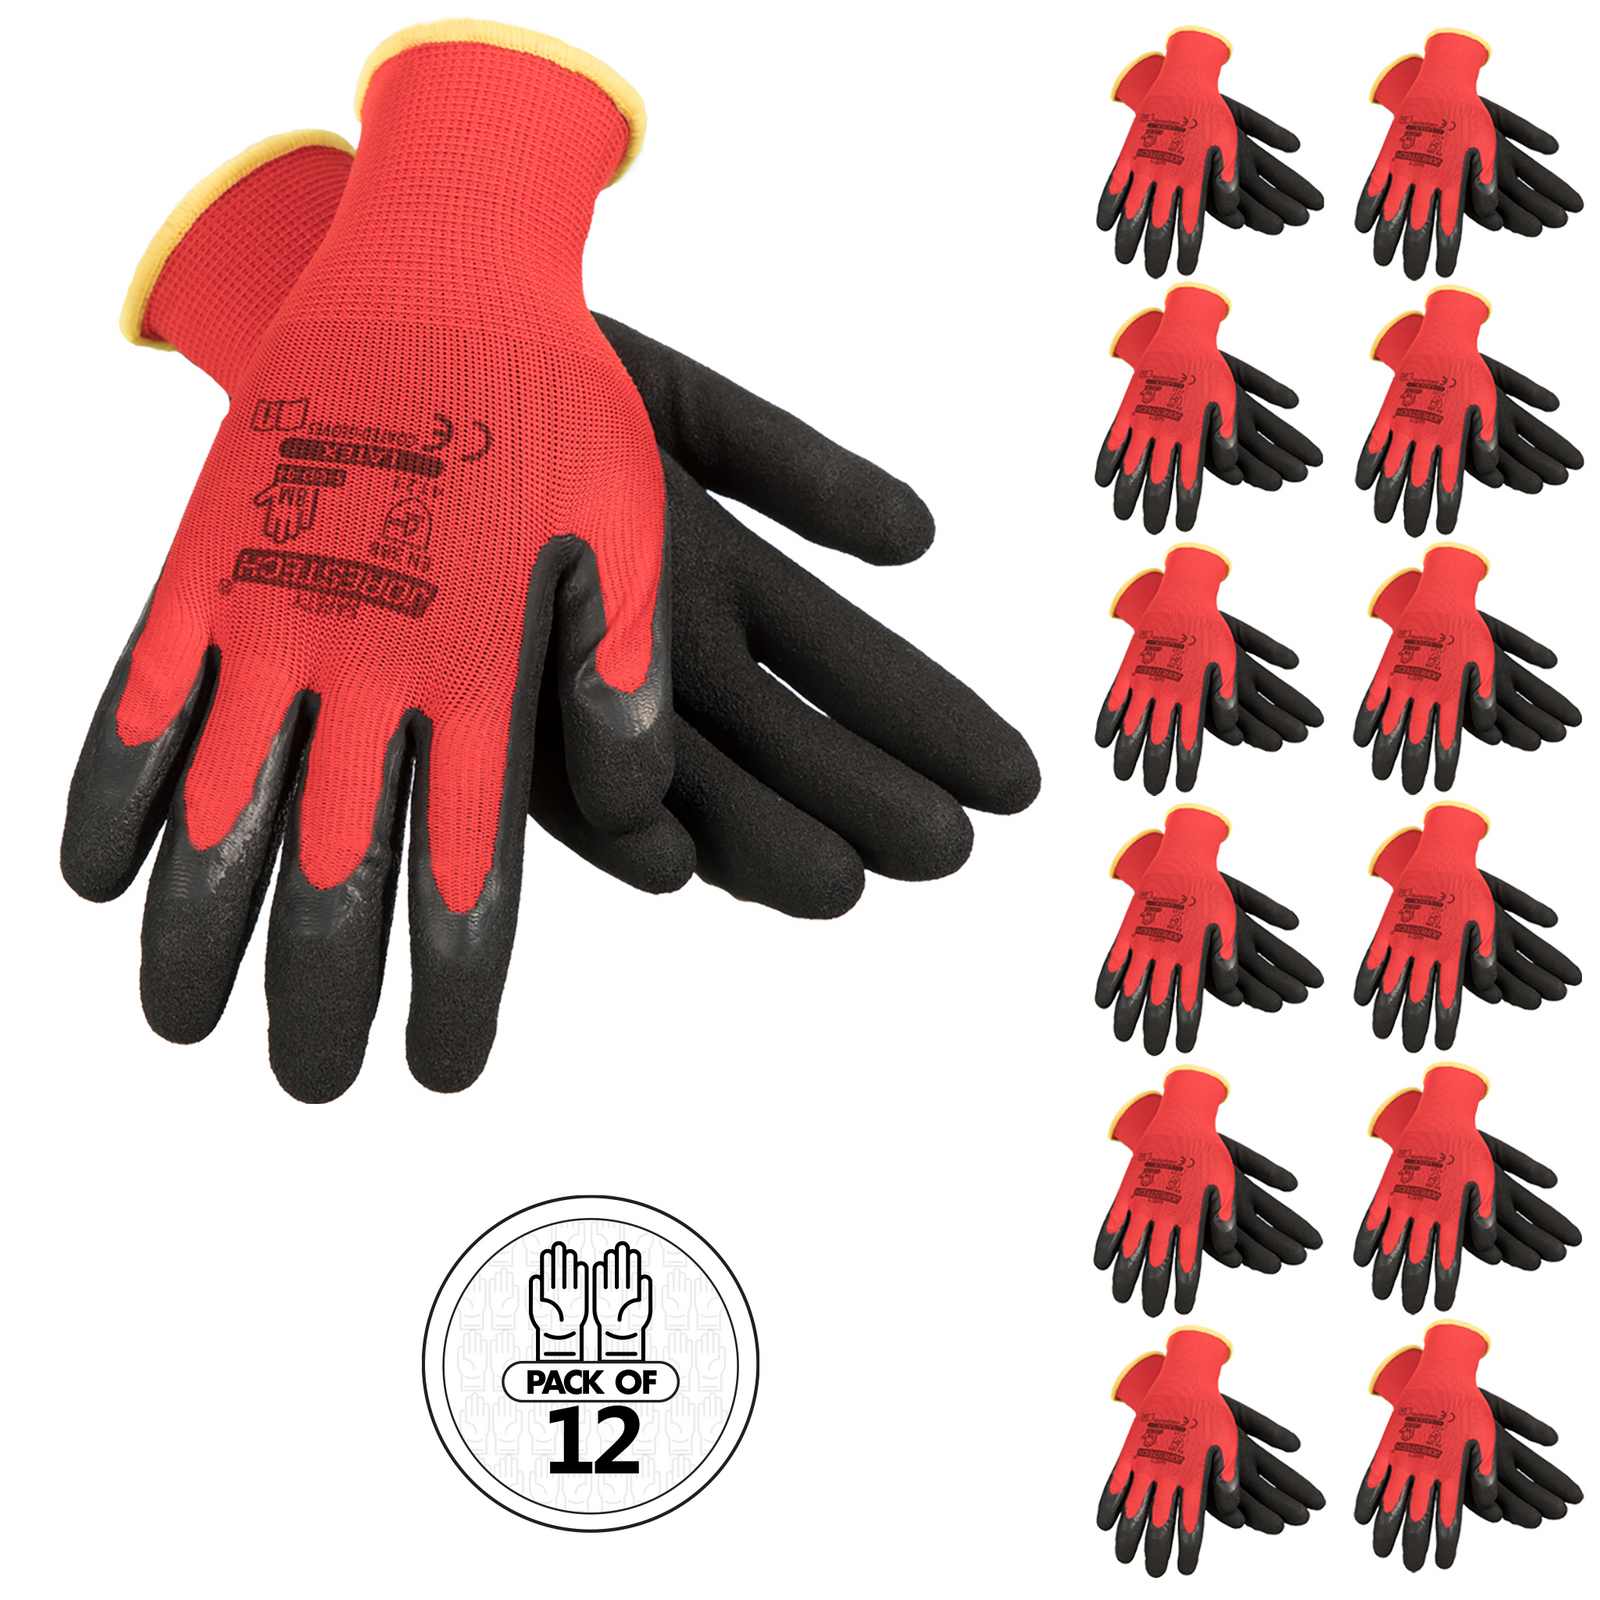 Benozit 12 Pairs Rubber Coated Work Gloves, Textured Latex Palm for Grip,  Construction, Warehouse and Garden Safety Gloves, Bulk Pack, Large